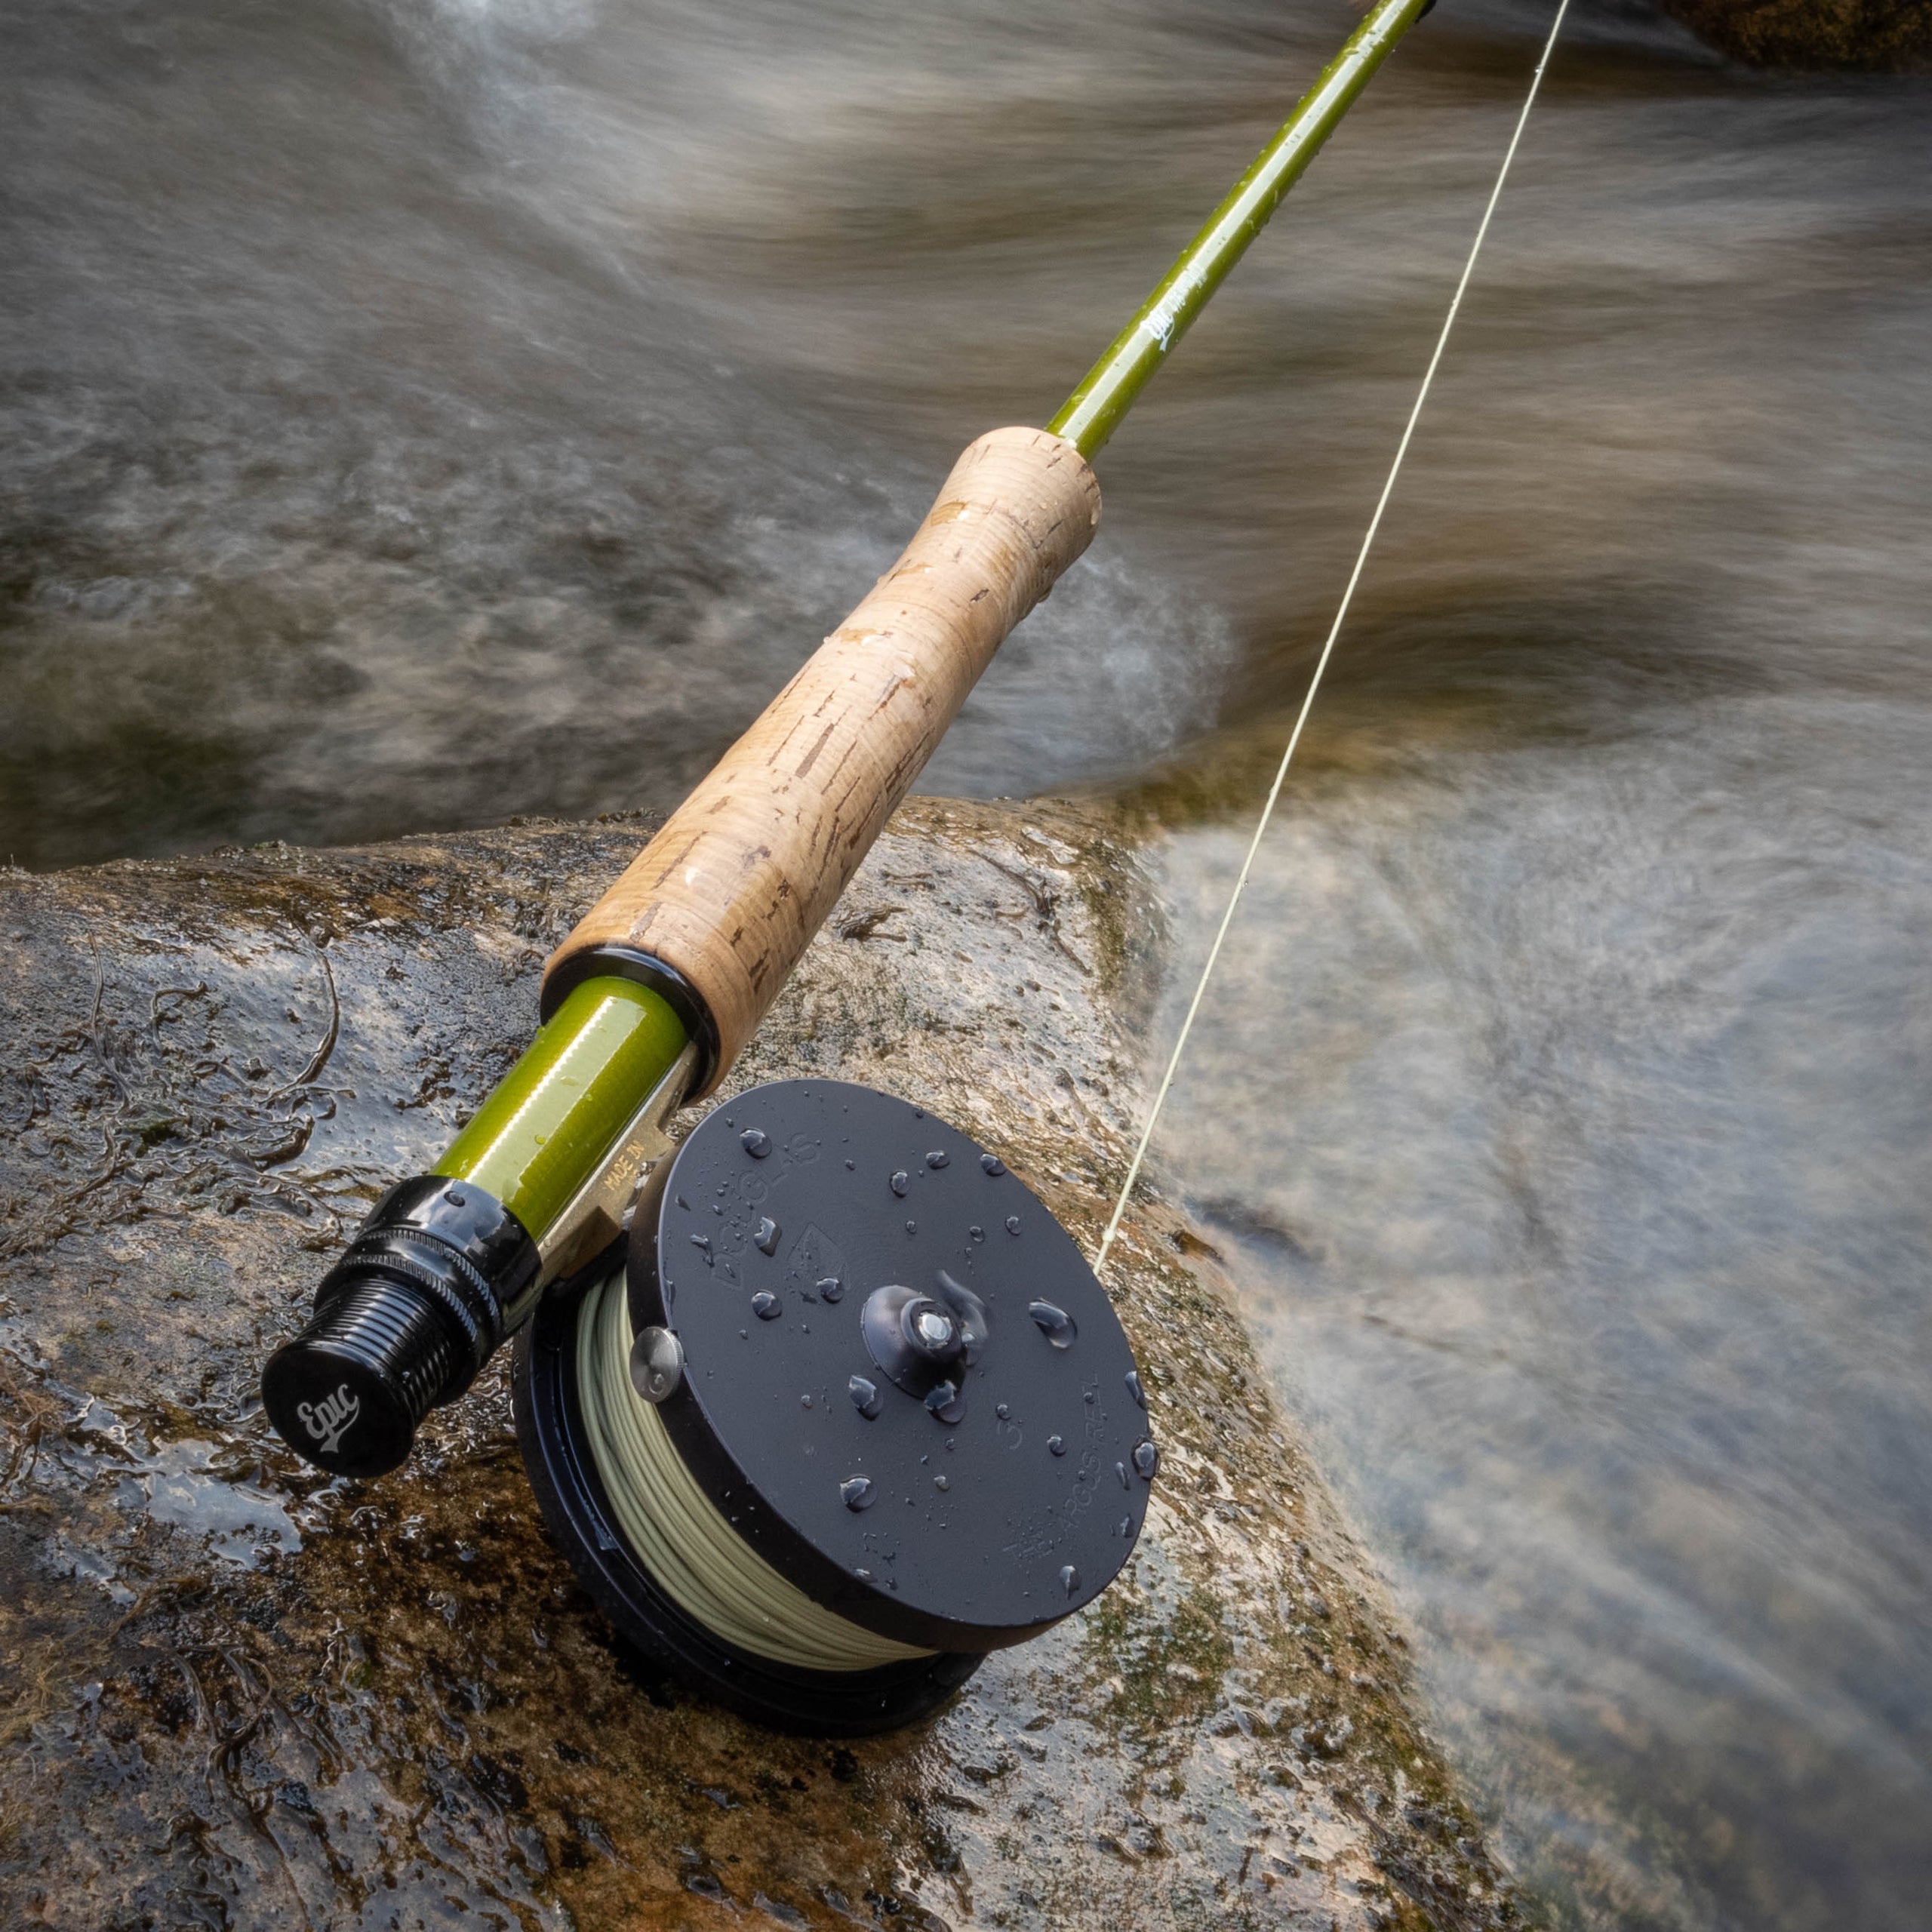 406 Fly Line - Double Taper (DT) Made in the US by Scientific Anglers.